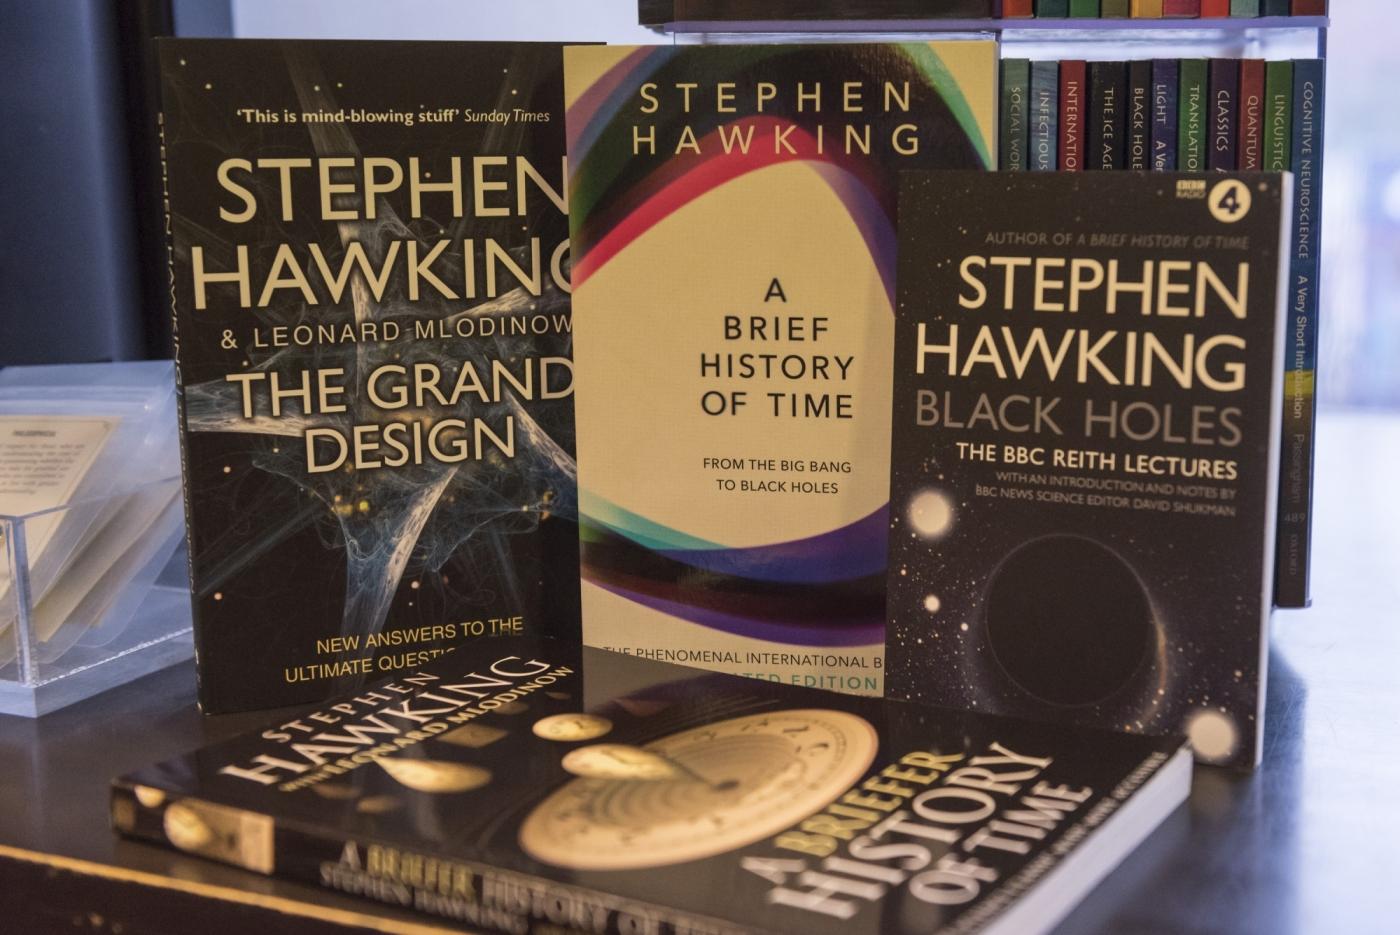 LONDON, March 14, 2018 (Xinhua) -- World renowned physicist Stephen Hawking's books are seen at a bookshop in London, Britain, on March 14, 2018. Renowned British physicist Stephen Hawking died peacefully at home in the British university city of Cambridge in the early hours of Wednesday at the age of 76, his family spokesman said. (Xinhua/Stephen Chung/IANS) by .